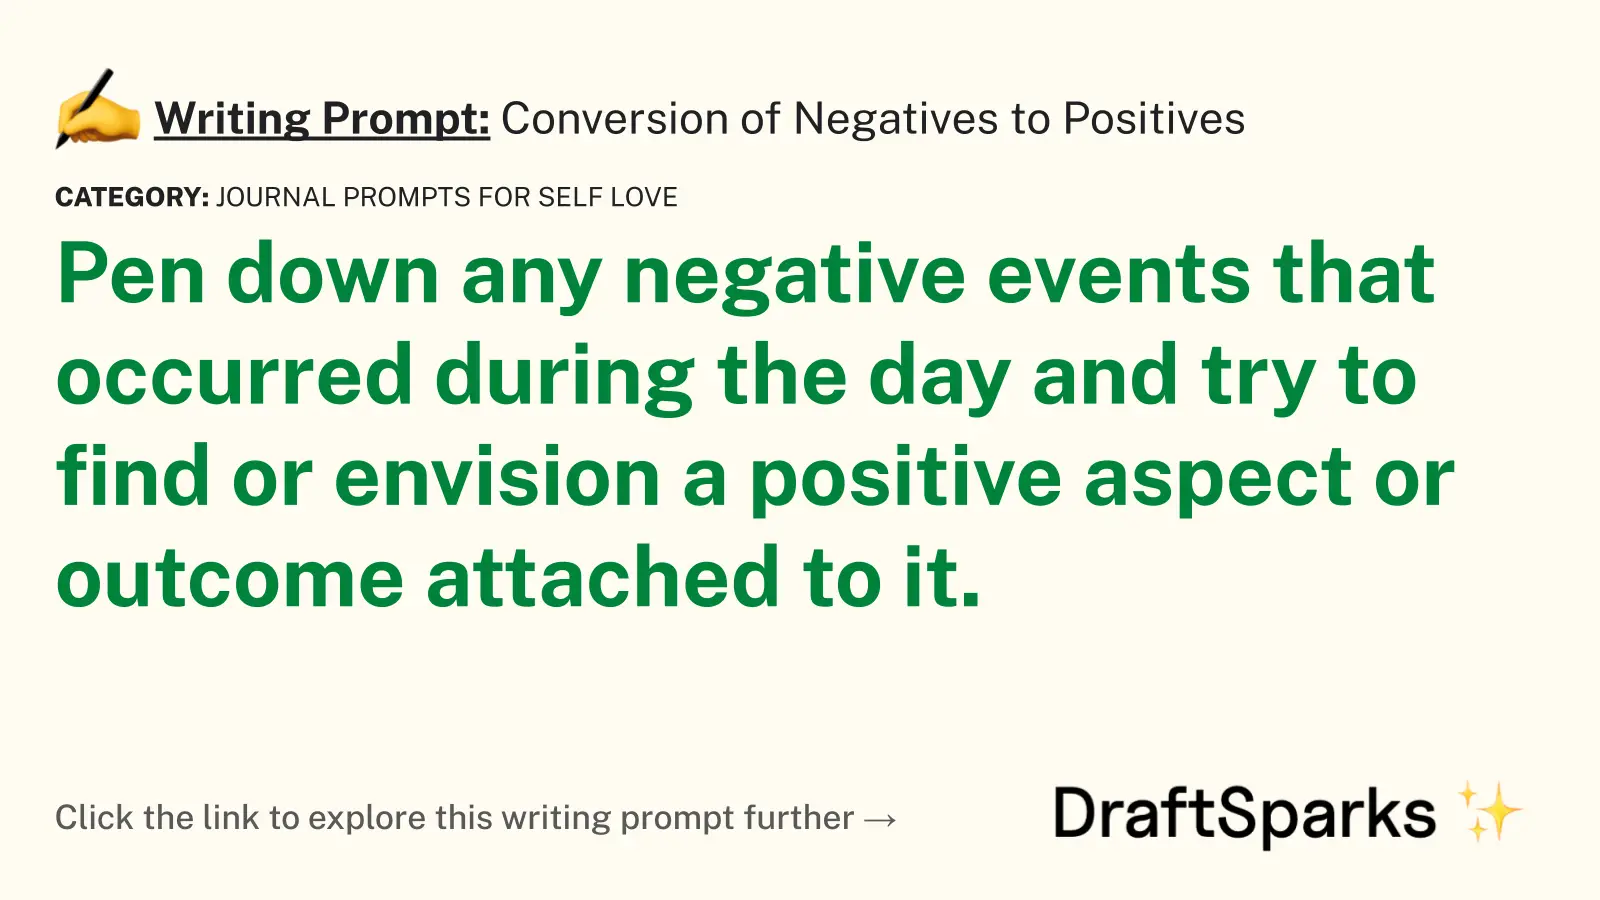 Conversion of Negatives to Positives